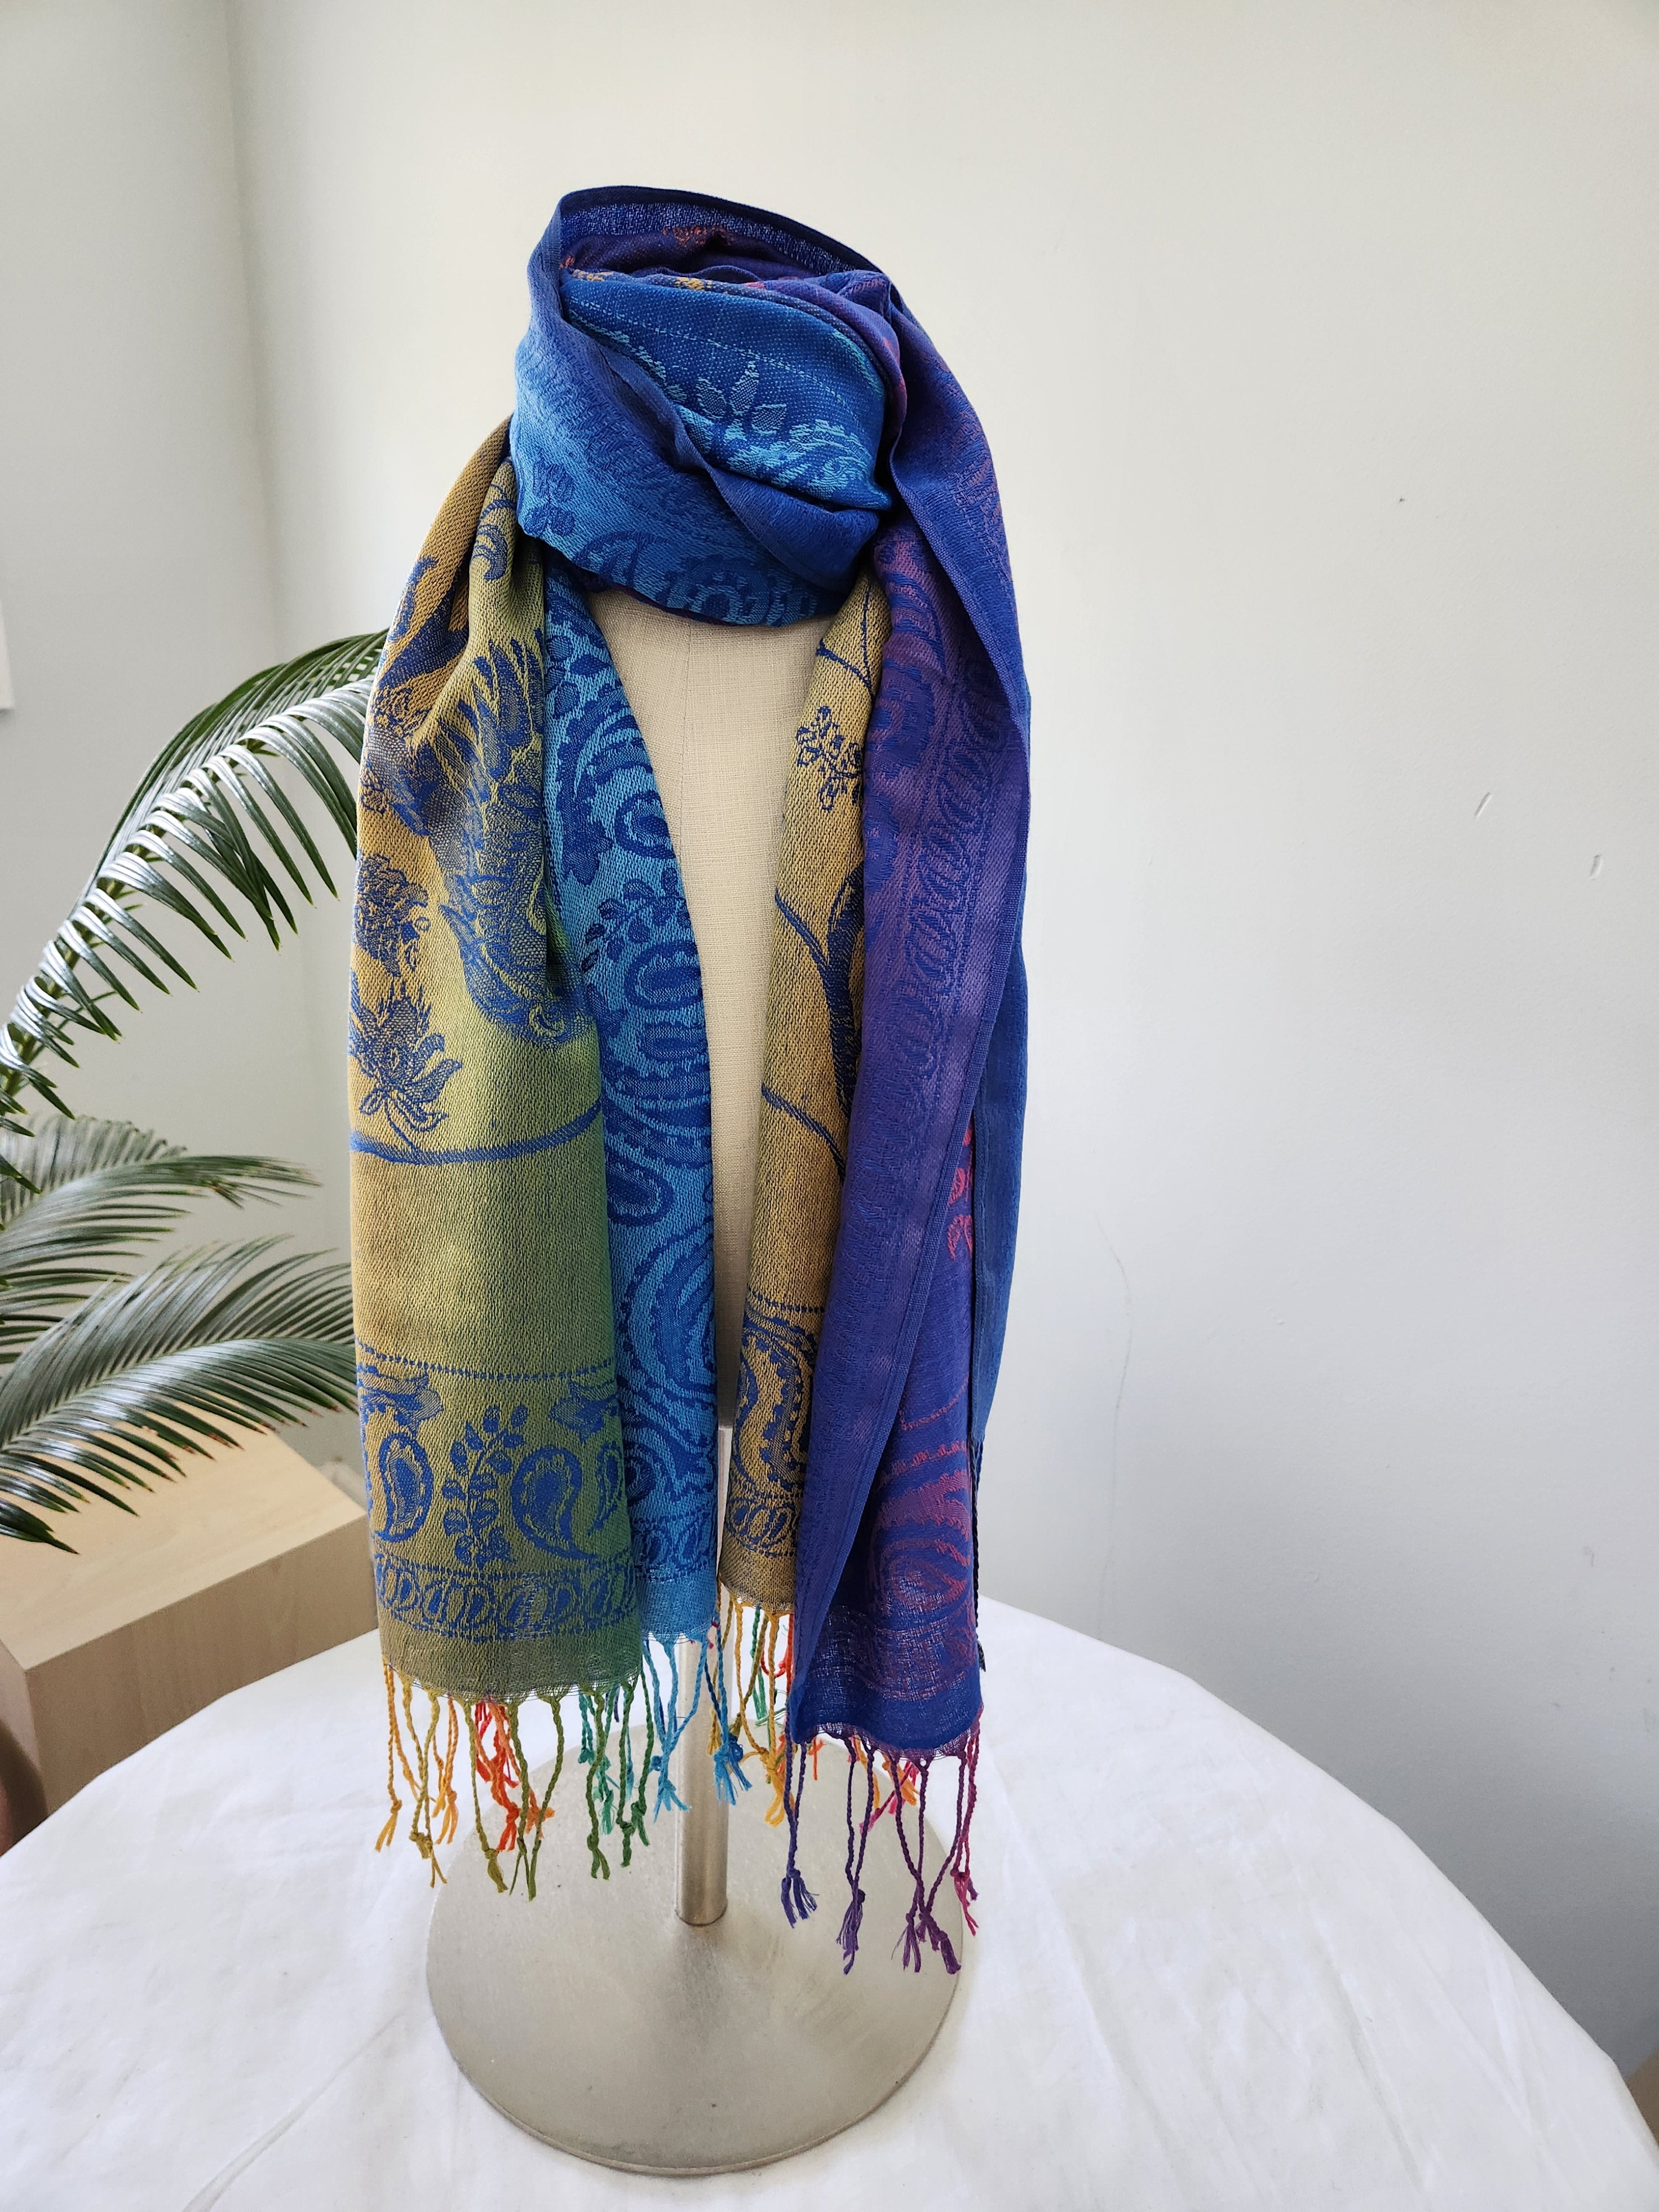 Buy marine-blue Women&#39;s Elegant Scarf or Wrap, Colorful Jewel-Tones, Great Gift for Holidays